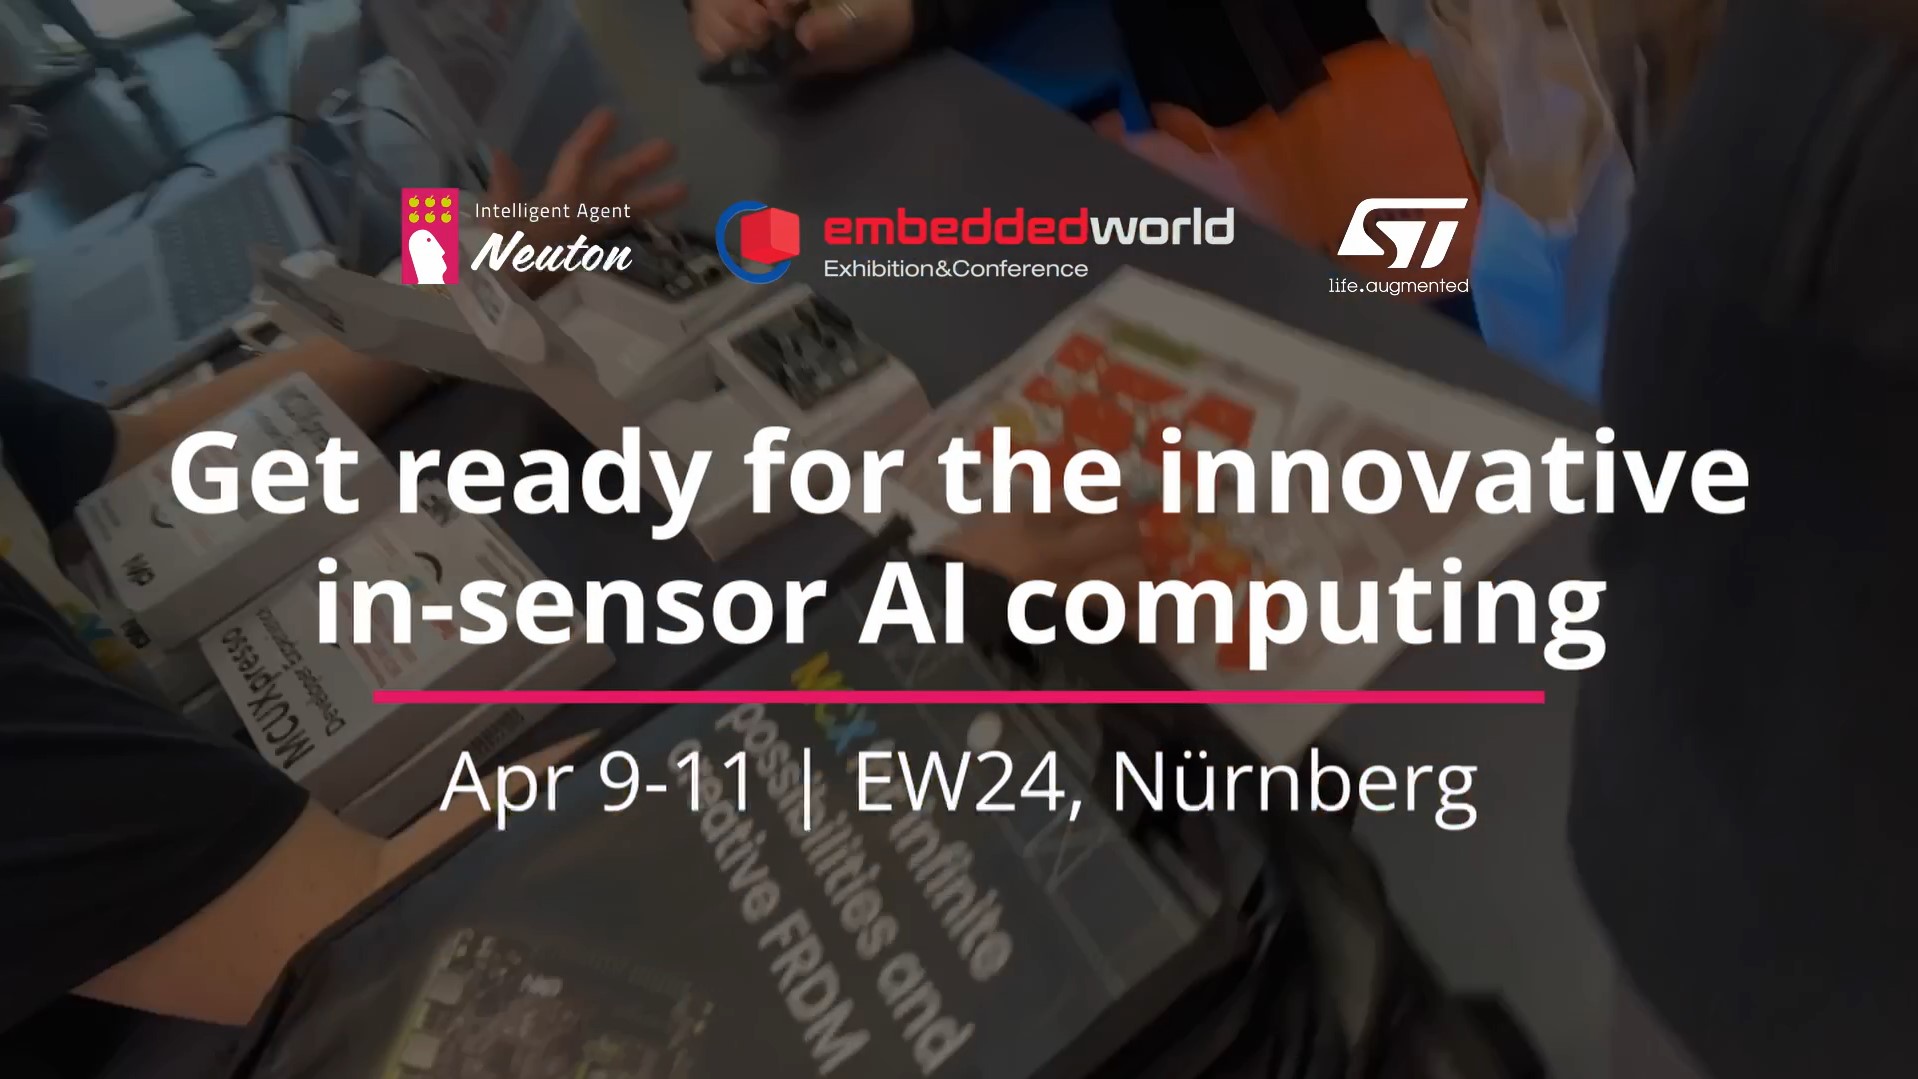 Innovative in-sensor AI computing at EW24 with STMicroelectronics